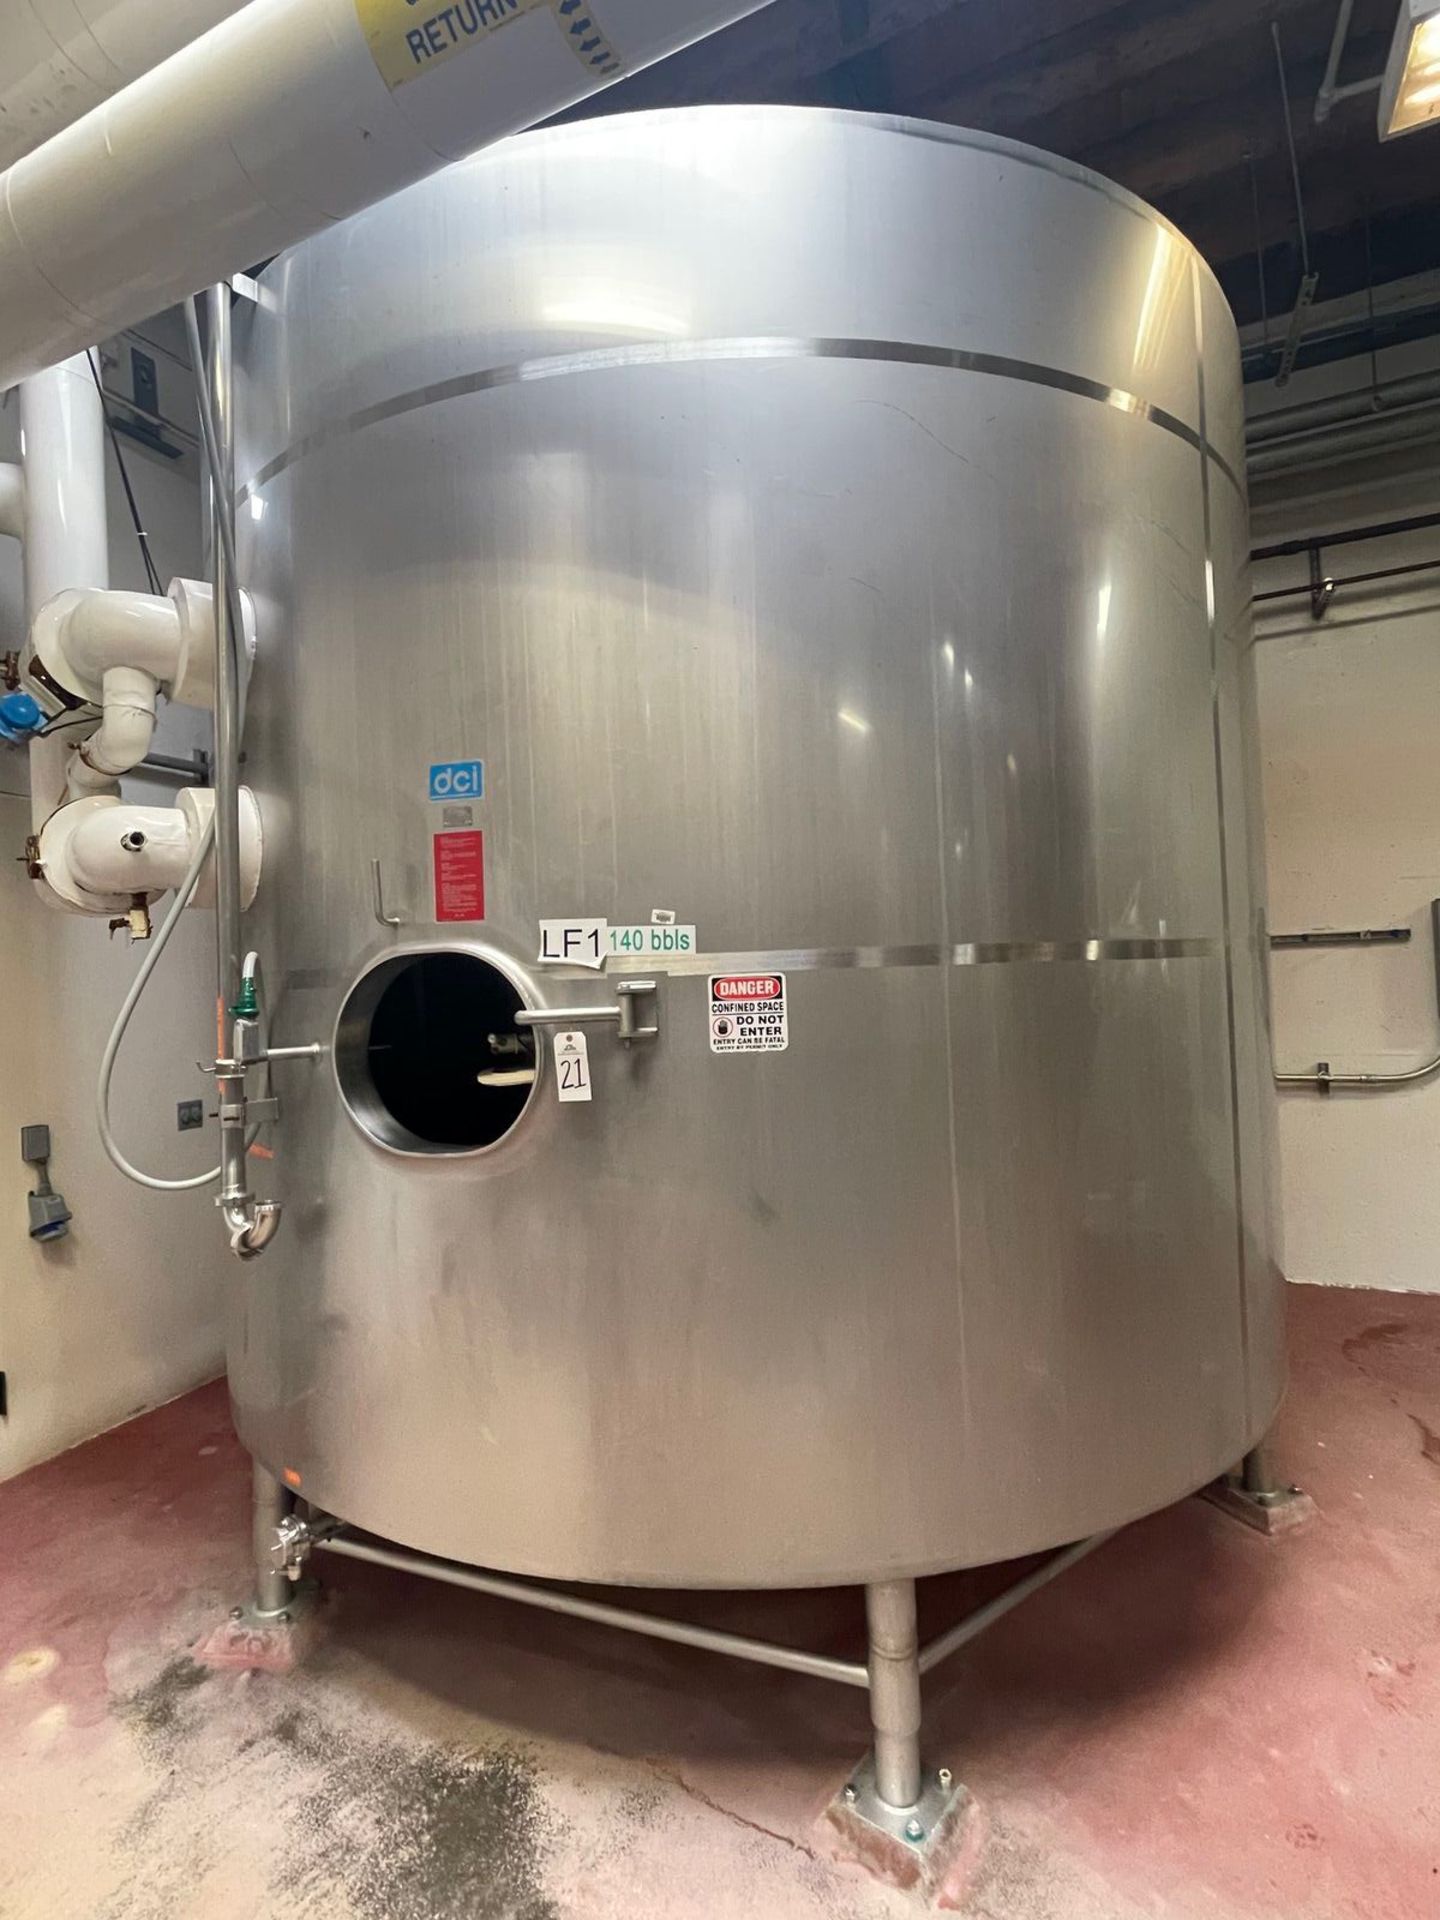 DCI 140 BBL FERMENTER (6683 GALLON JACKETED TANK), +75 PSI DESIGN PRESSURE, S/N | Rig Fee: 2500